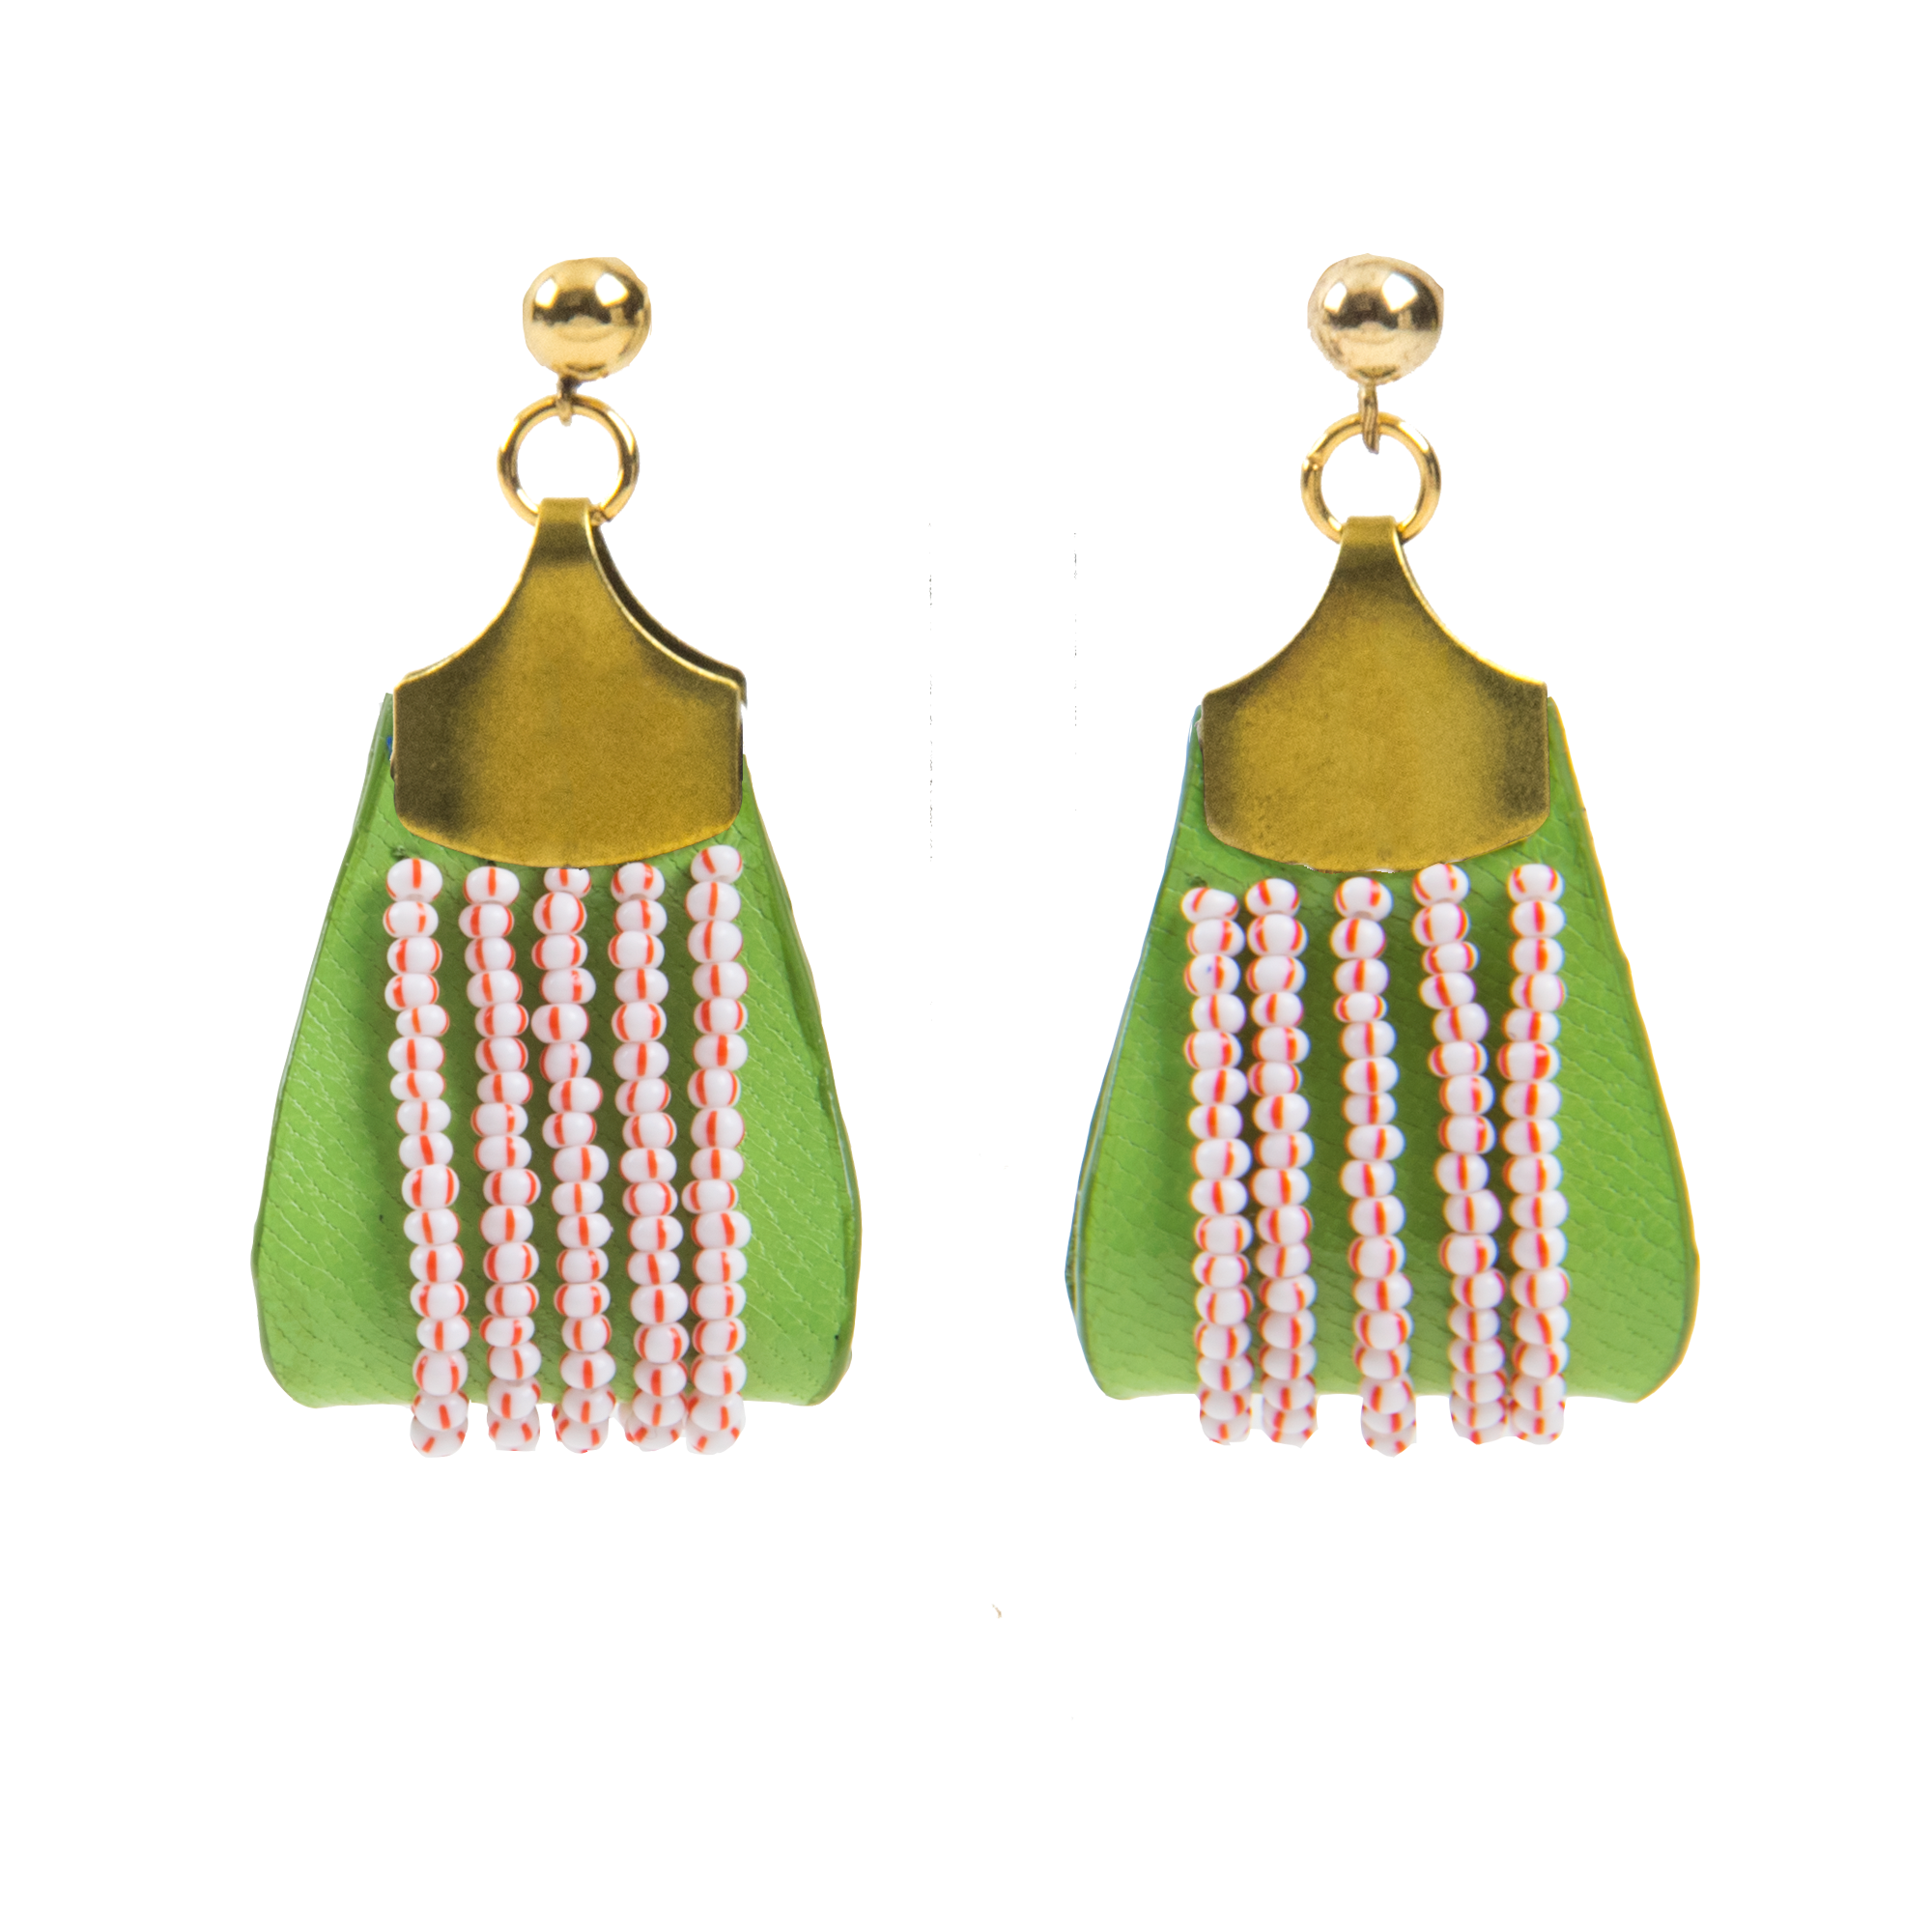 Jahde Leather Earrings x Lina Rosa Bead Collaboration